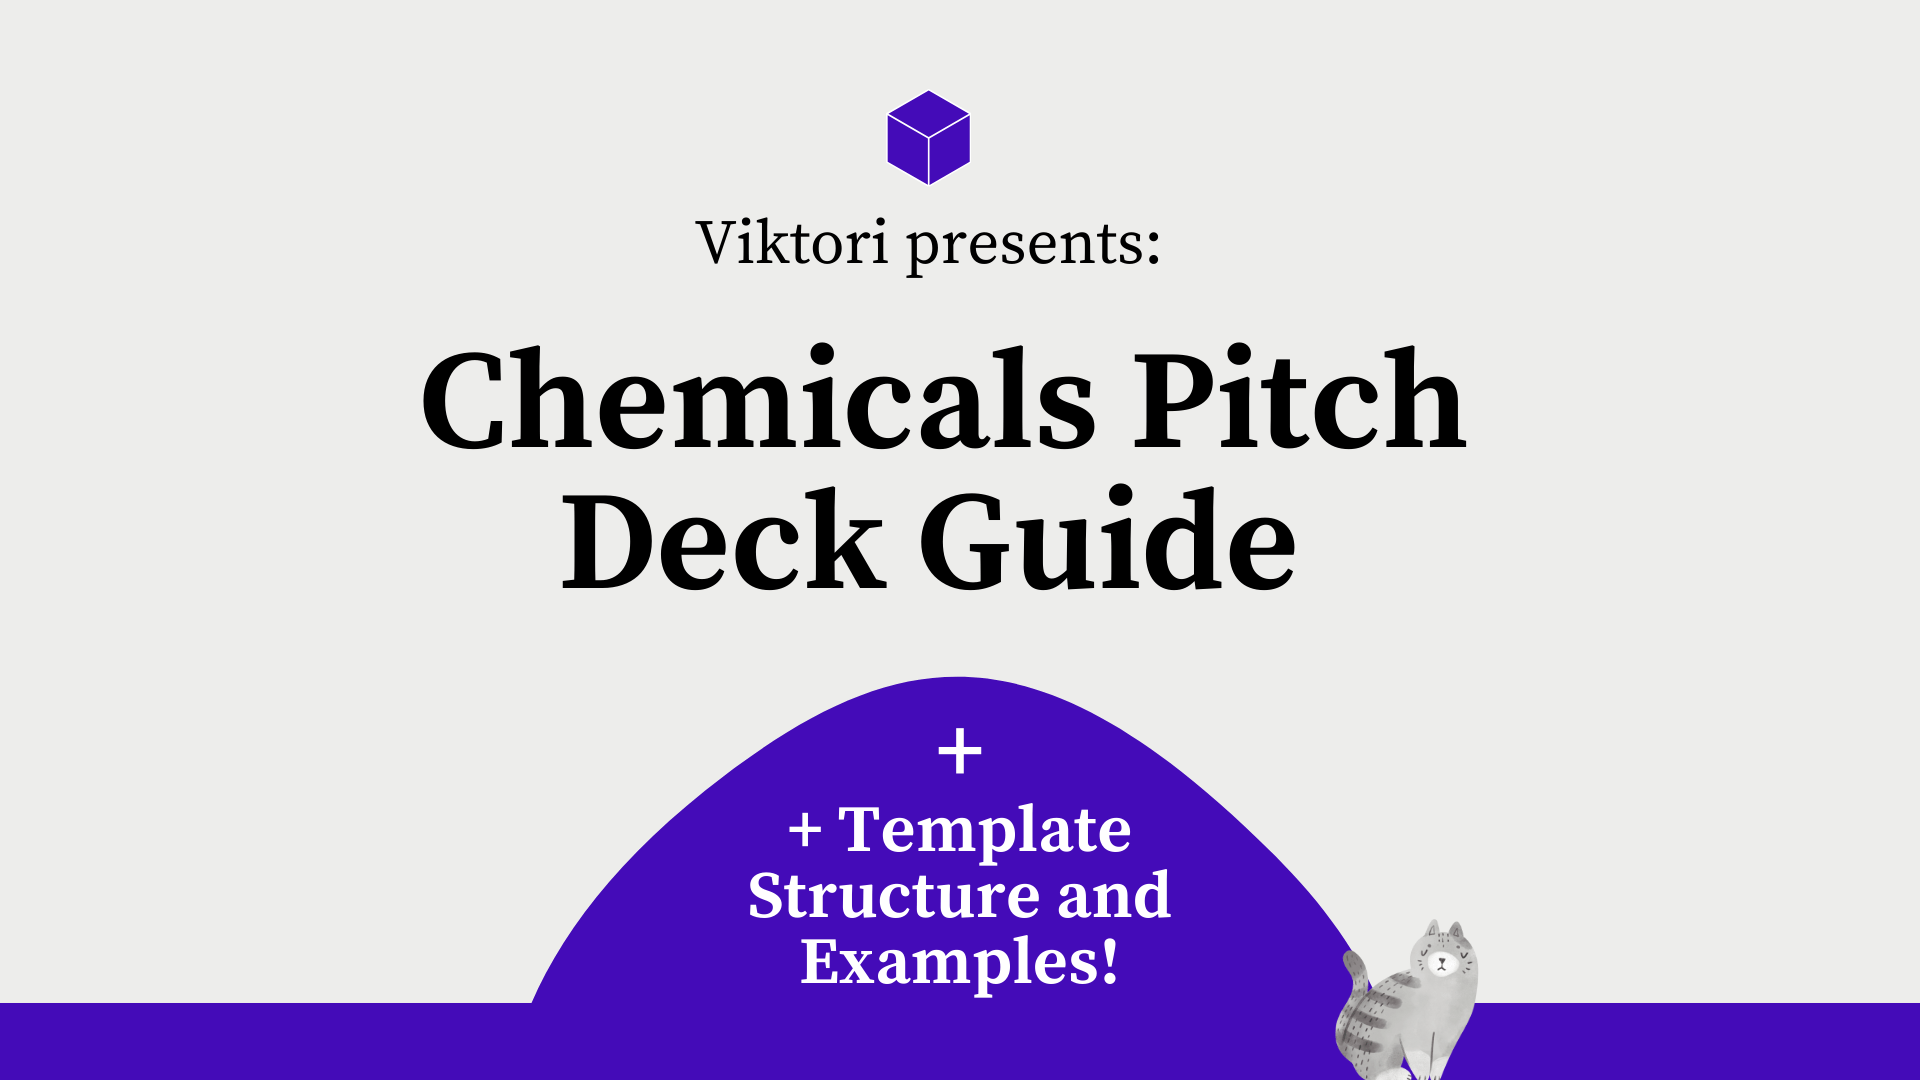 Chemicals Pitch Deck Guide